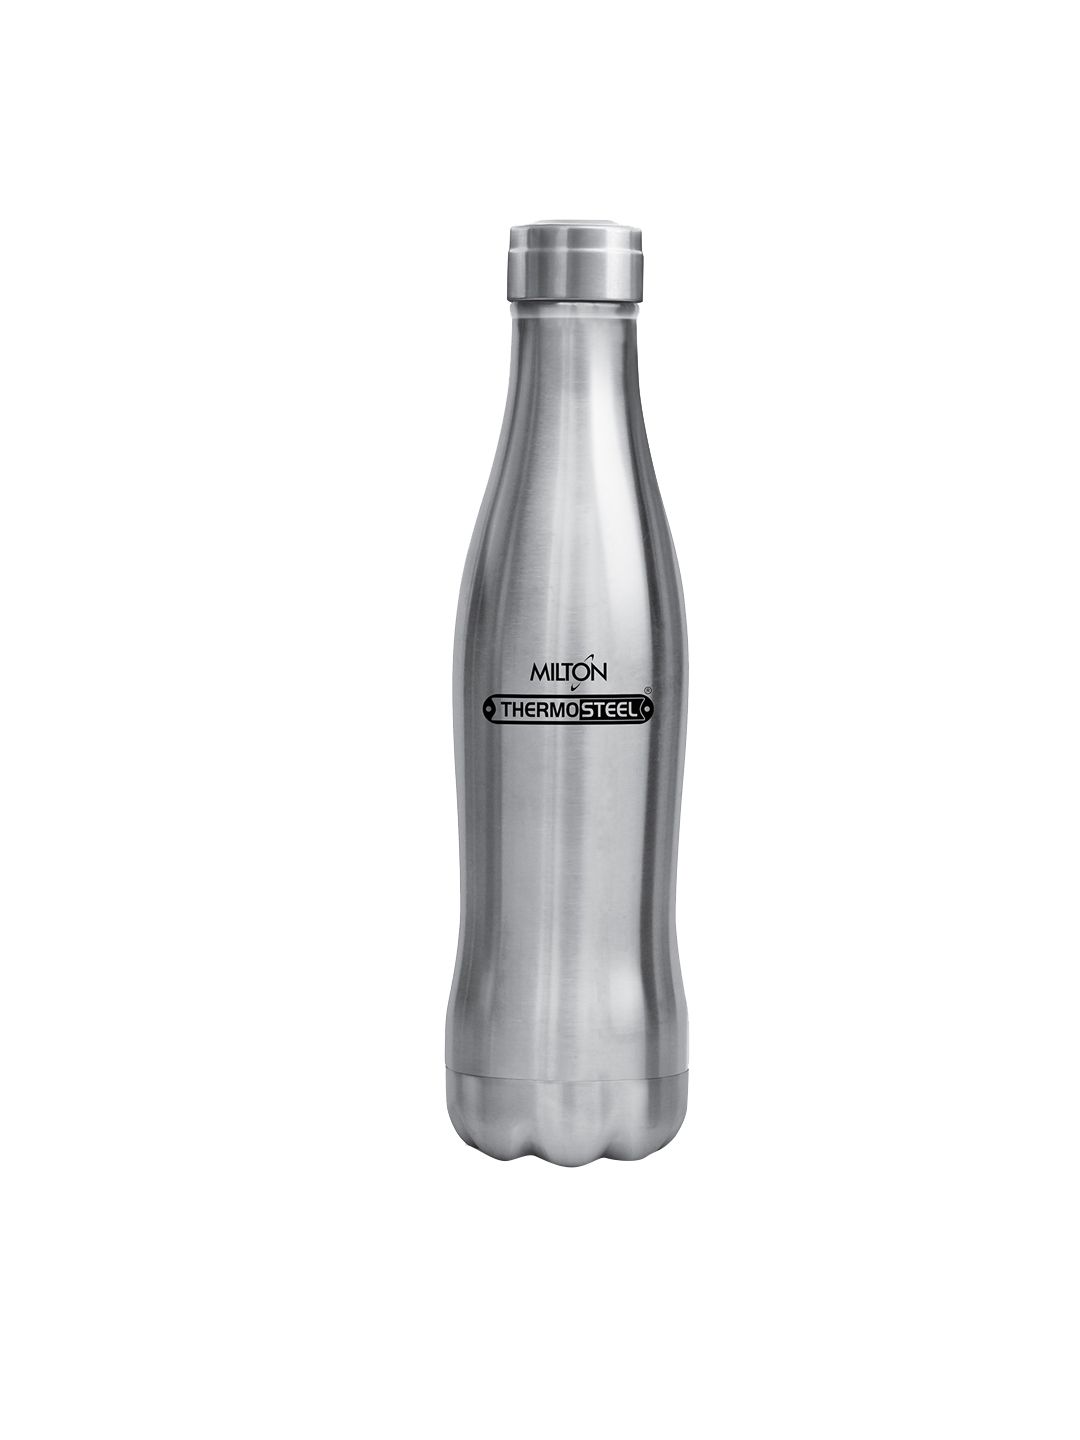 Milton Unisex Silver-Toned Vacuum Flasks Thermosteel Flip Lid Water Bottle 600ml Price in India